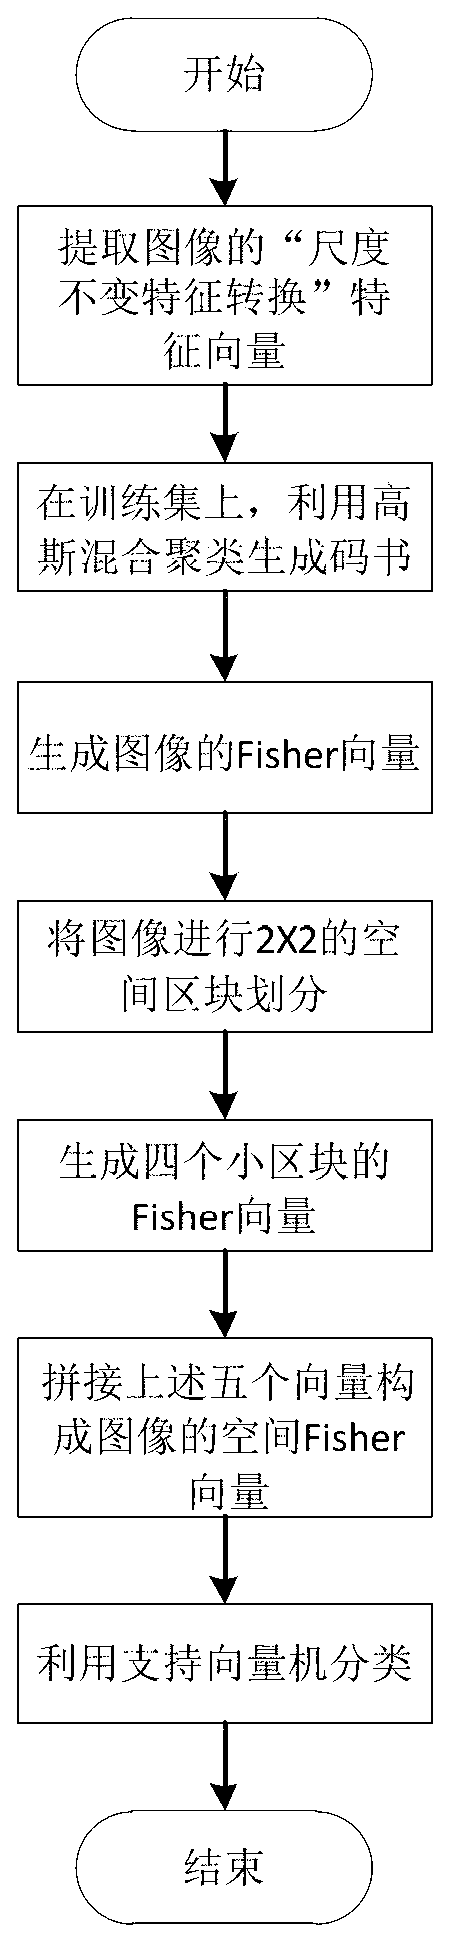 Spatial Fisher vector based image classification method